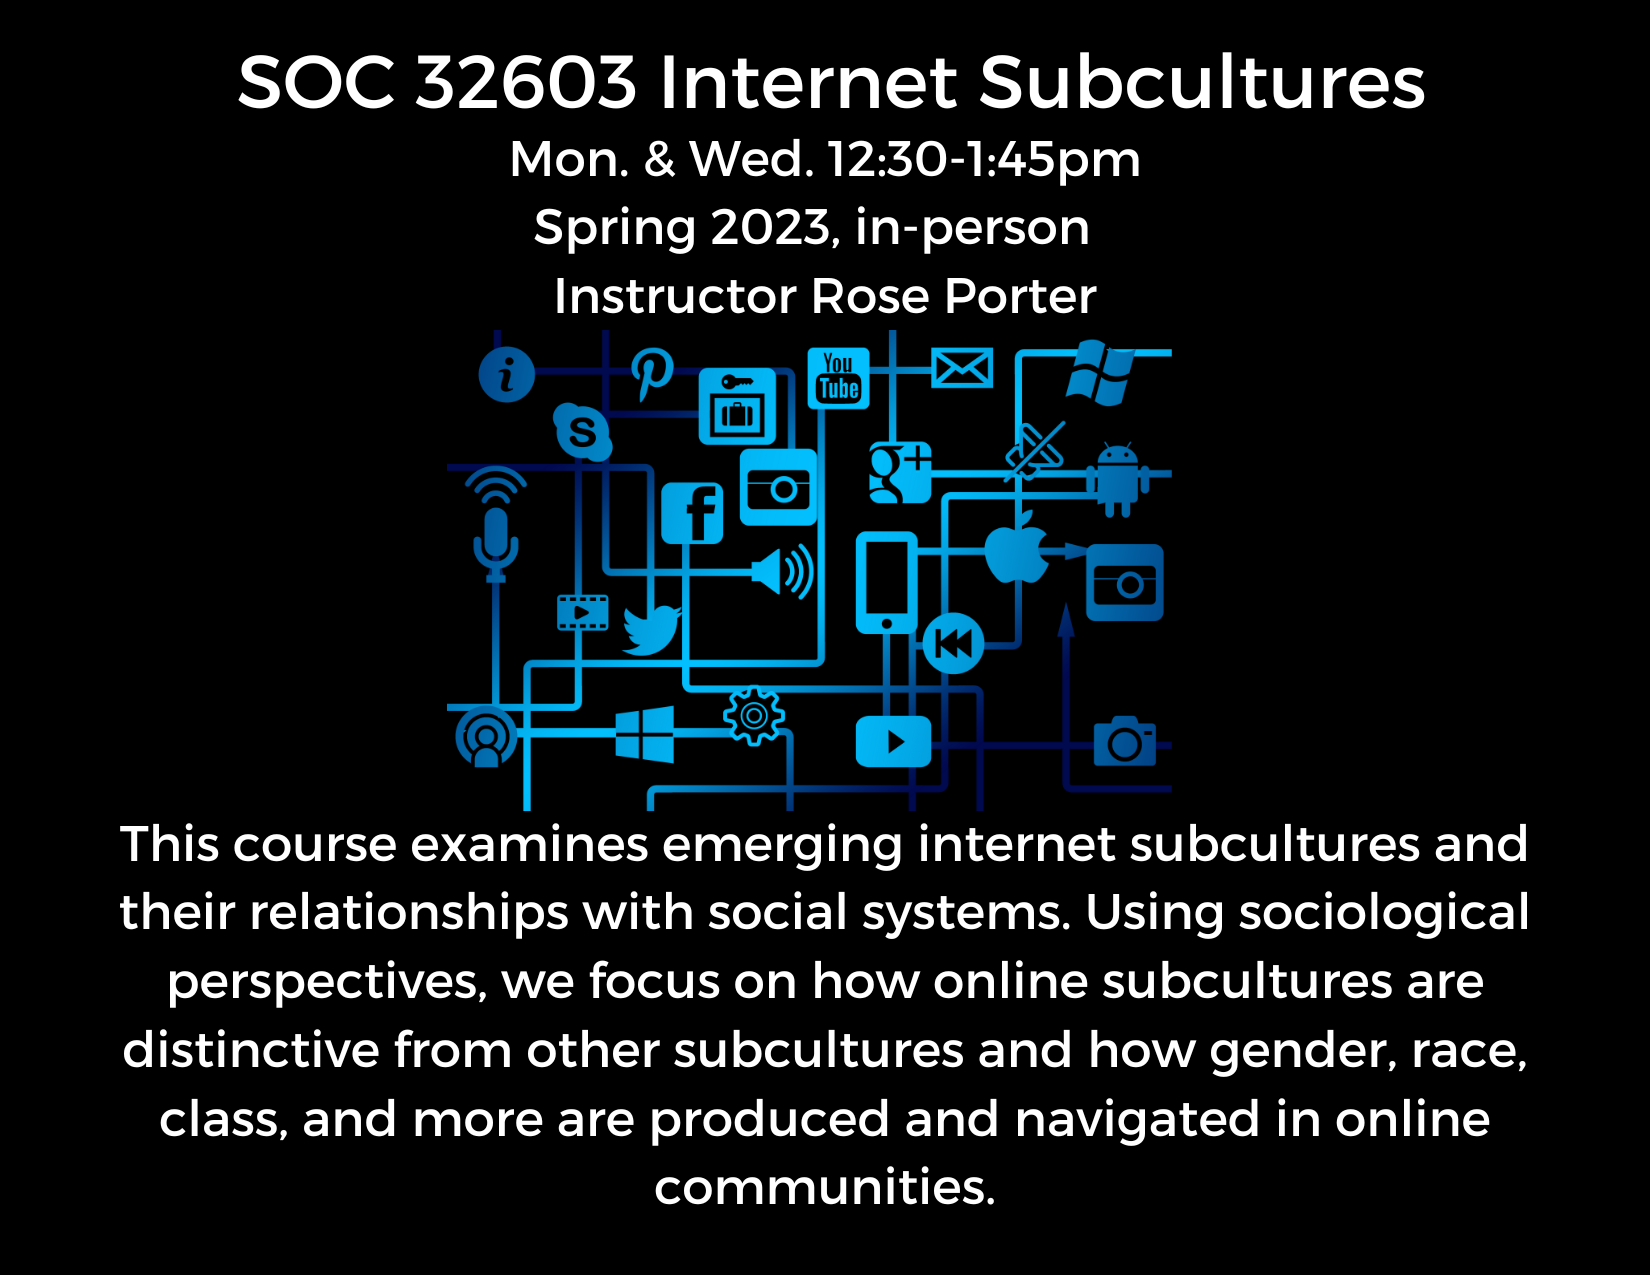 Colin Powell School CCNY Sociology Internet Subcultures Spring 2023 Course